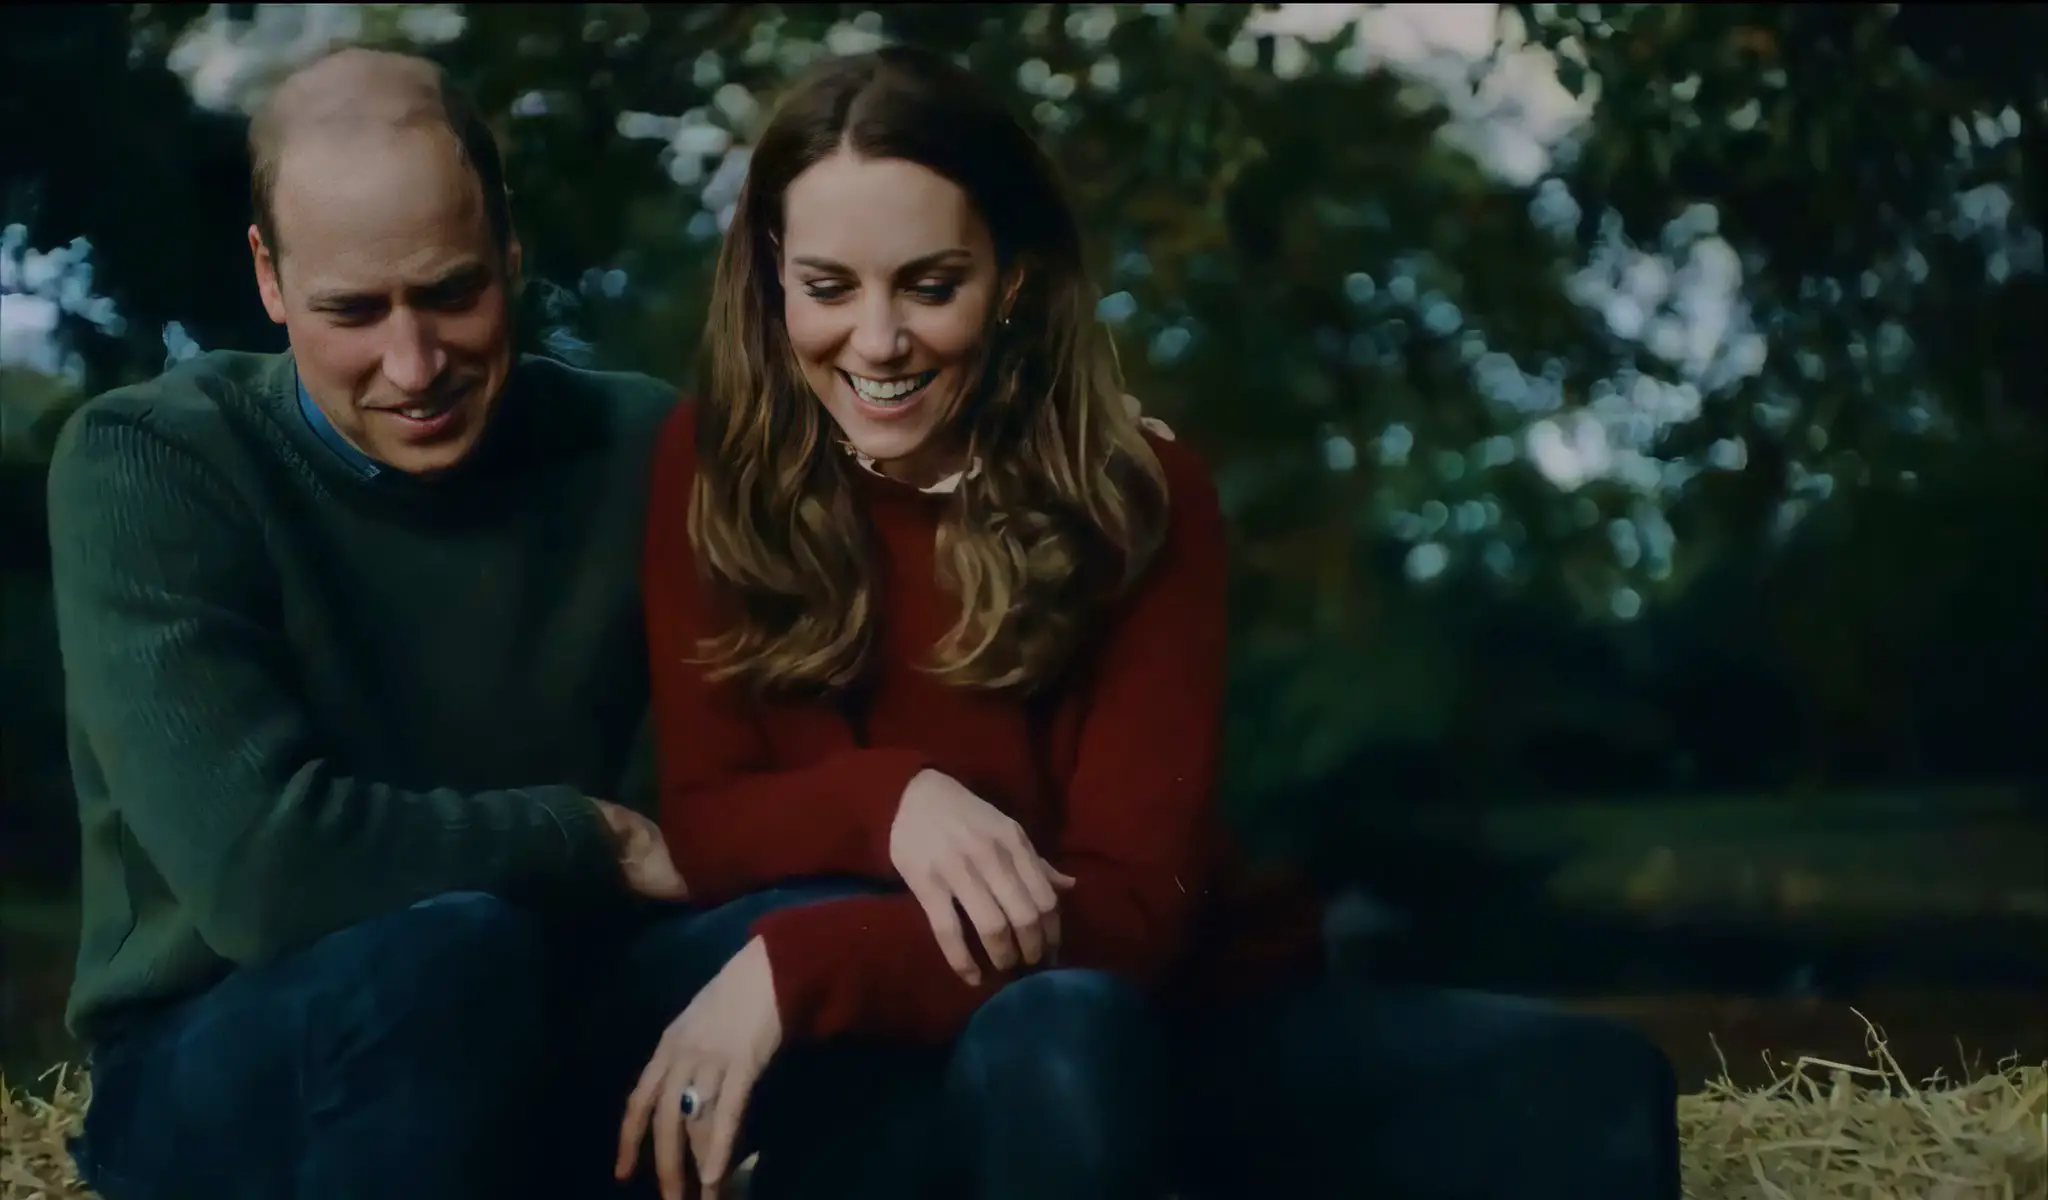 The Duke and Duchess of Cambridge shared a cheerful Family video to mark their 10th Wedding anniversary